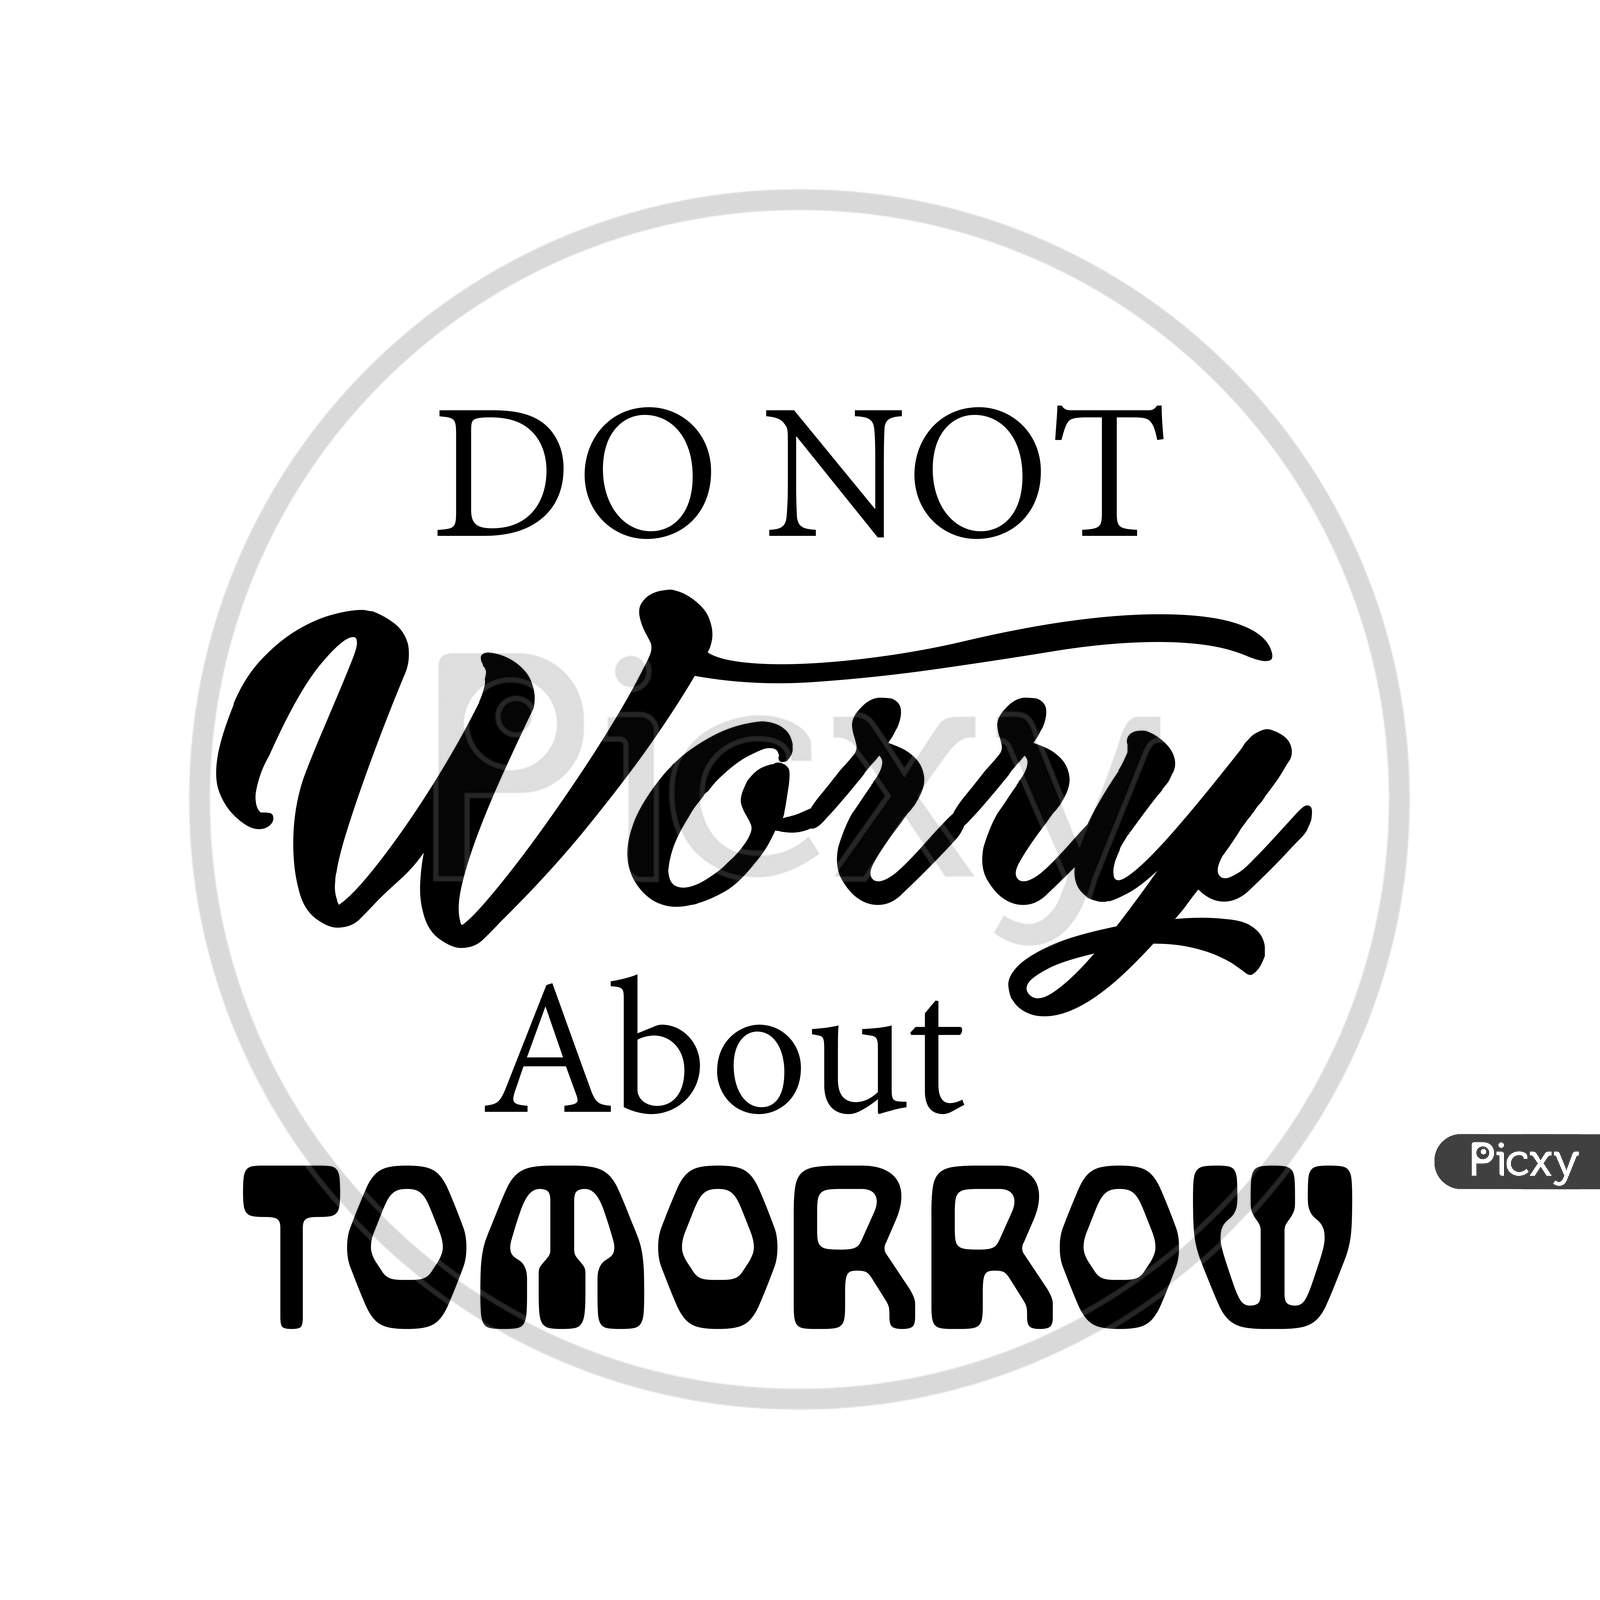 Biblical Phrase - Do not worry about tomorrow